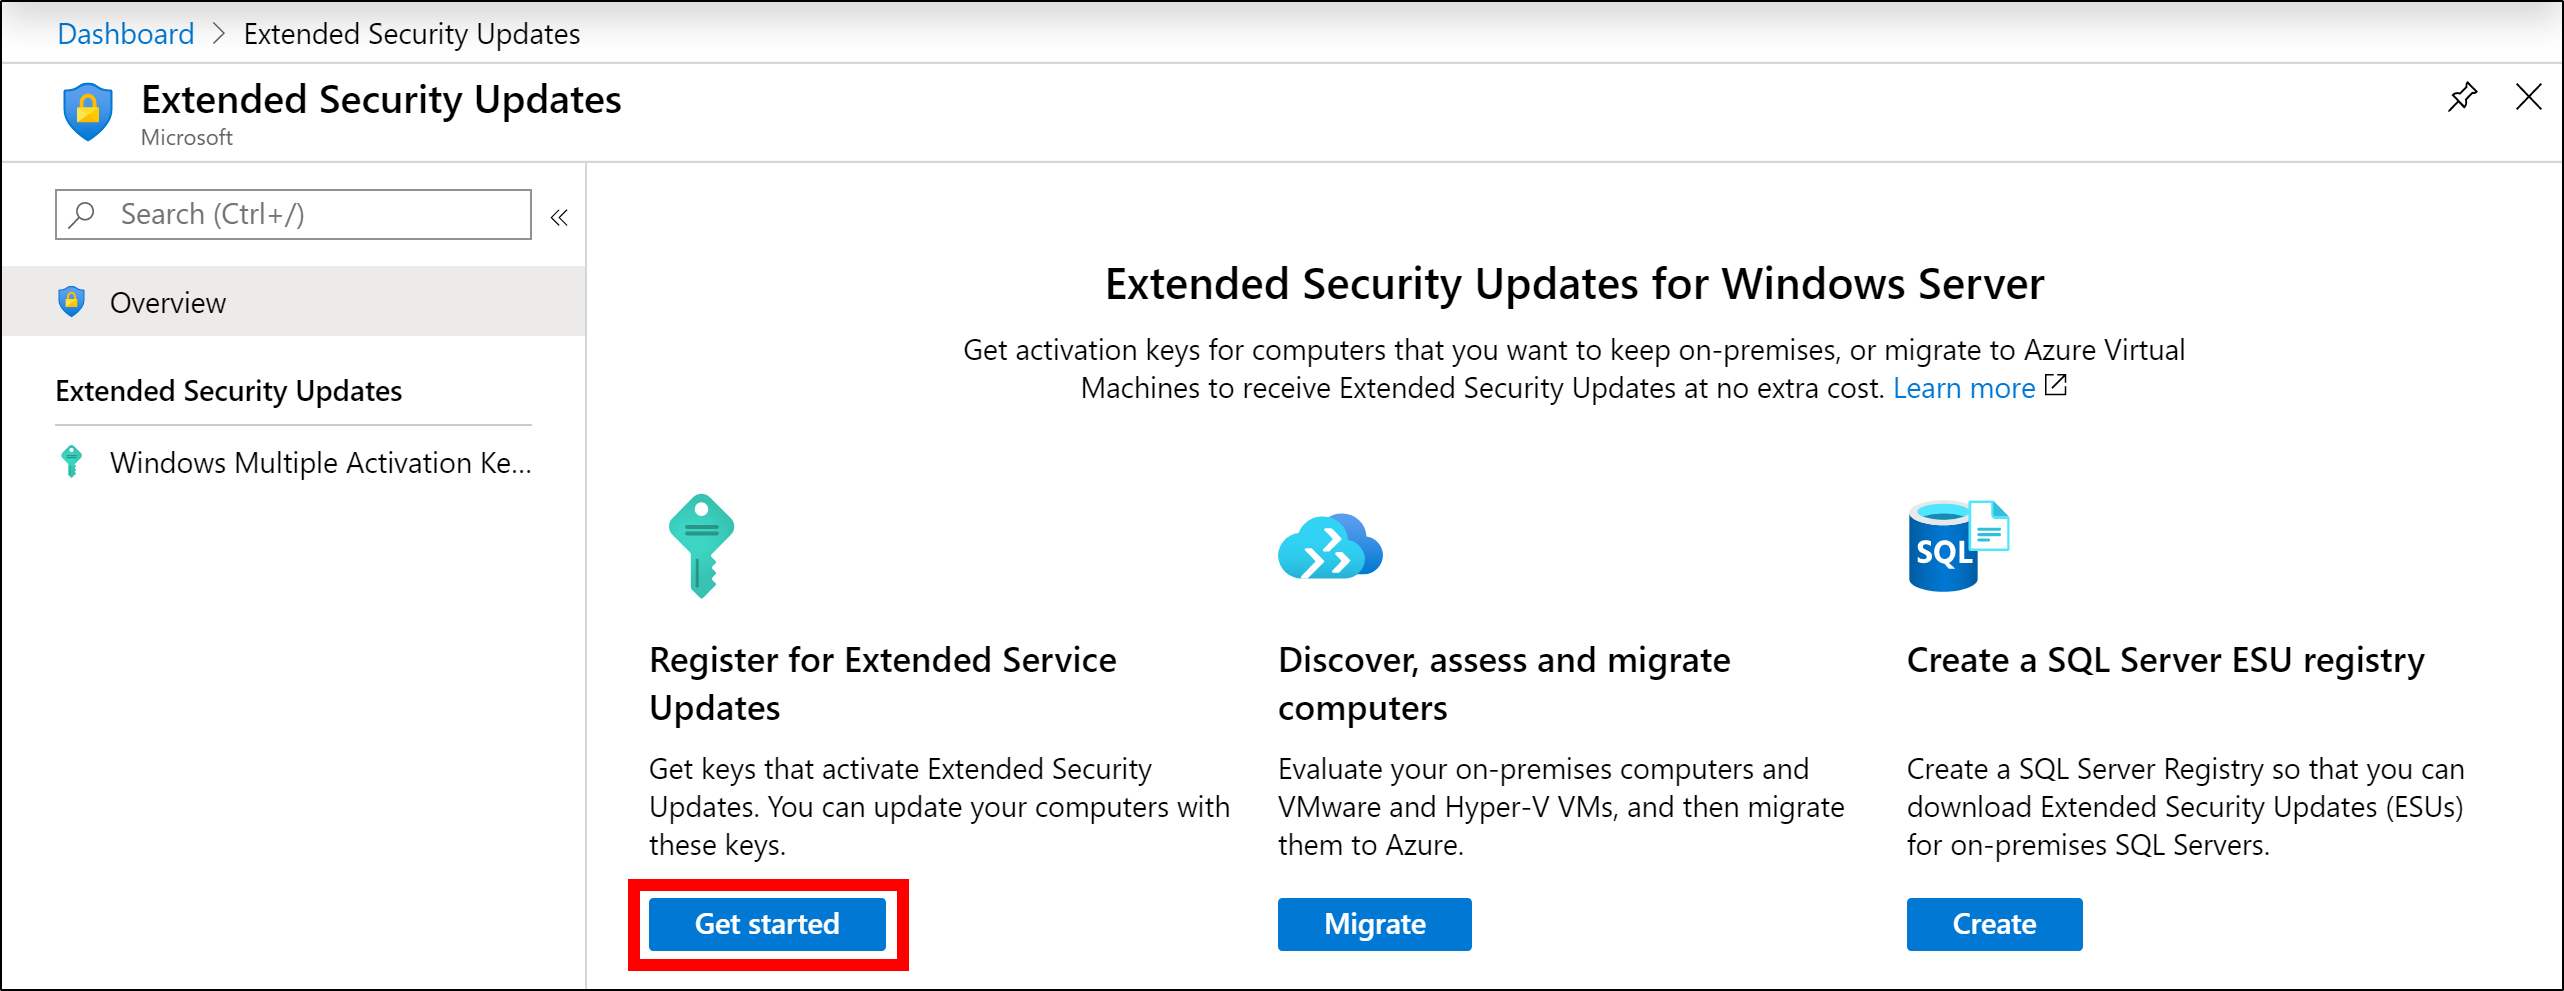 How to get Extended Updates (ESU) for Windows Server 2008, 2008 R2, 2012, and 2012 R2 | Microsoft Learn